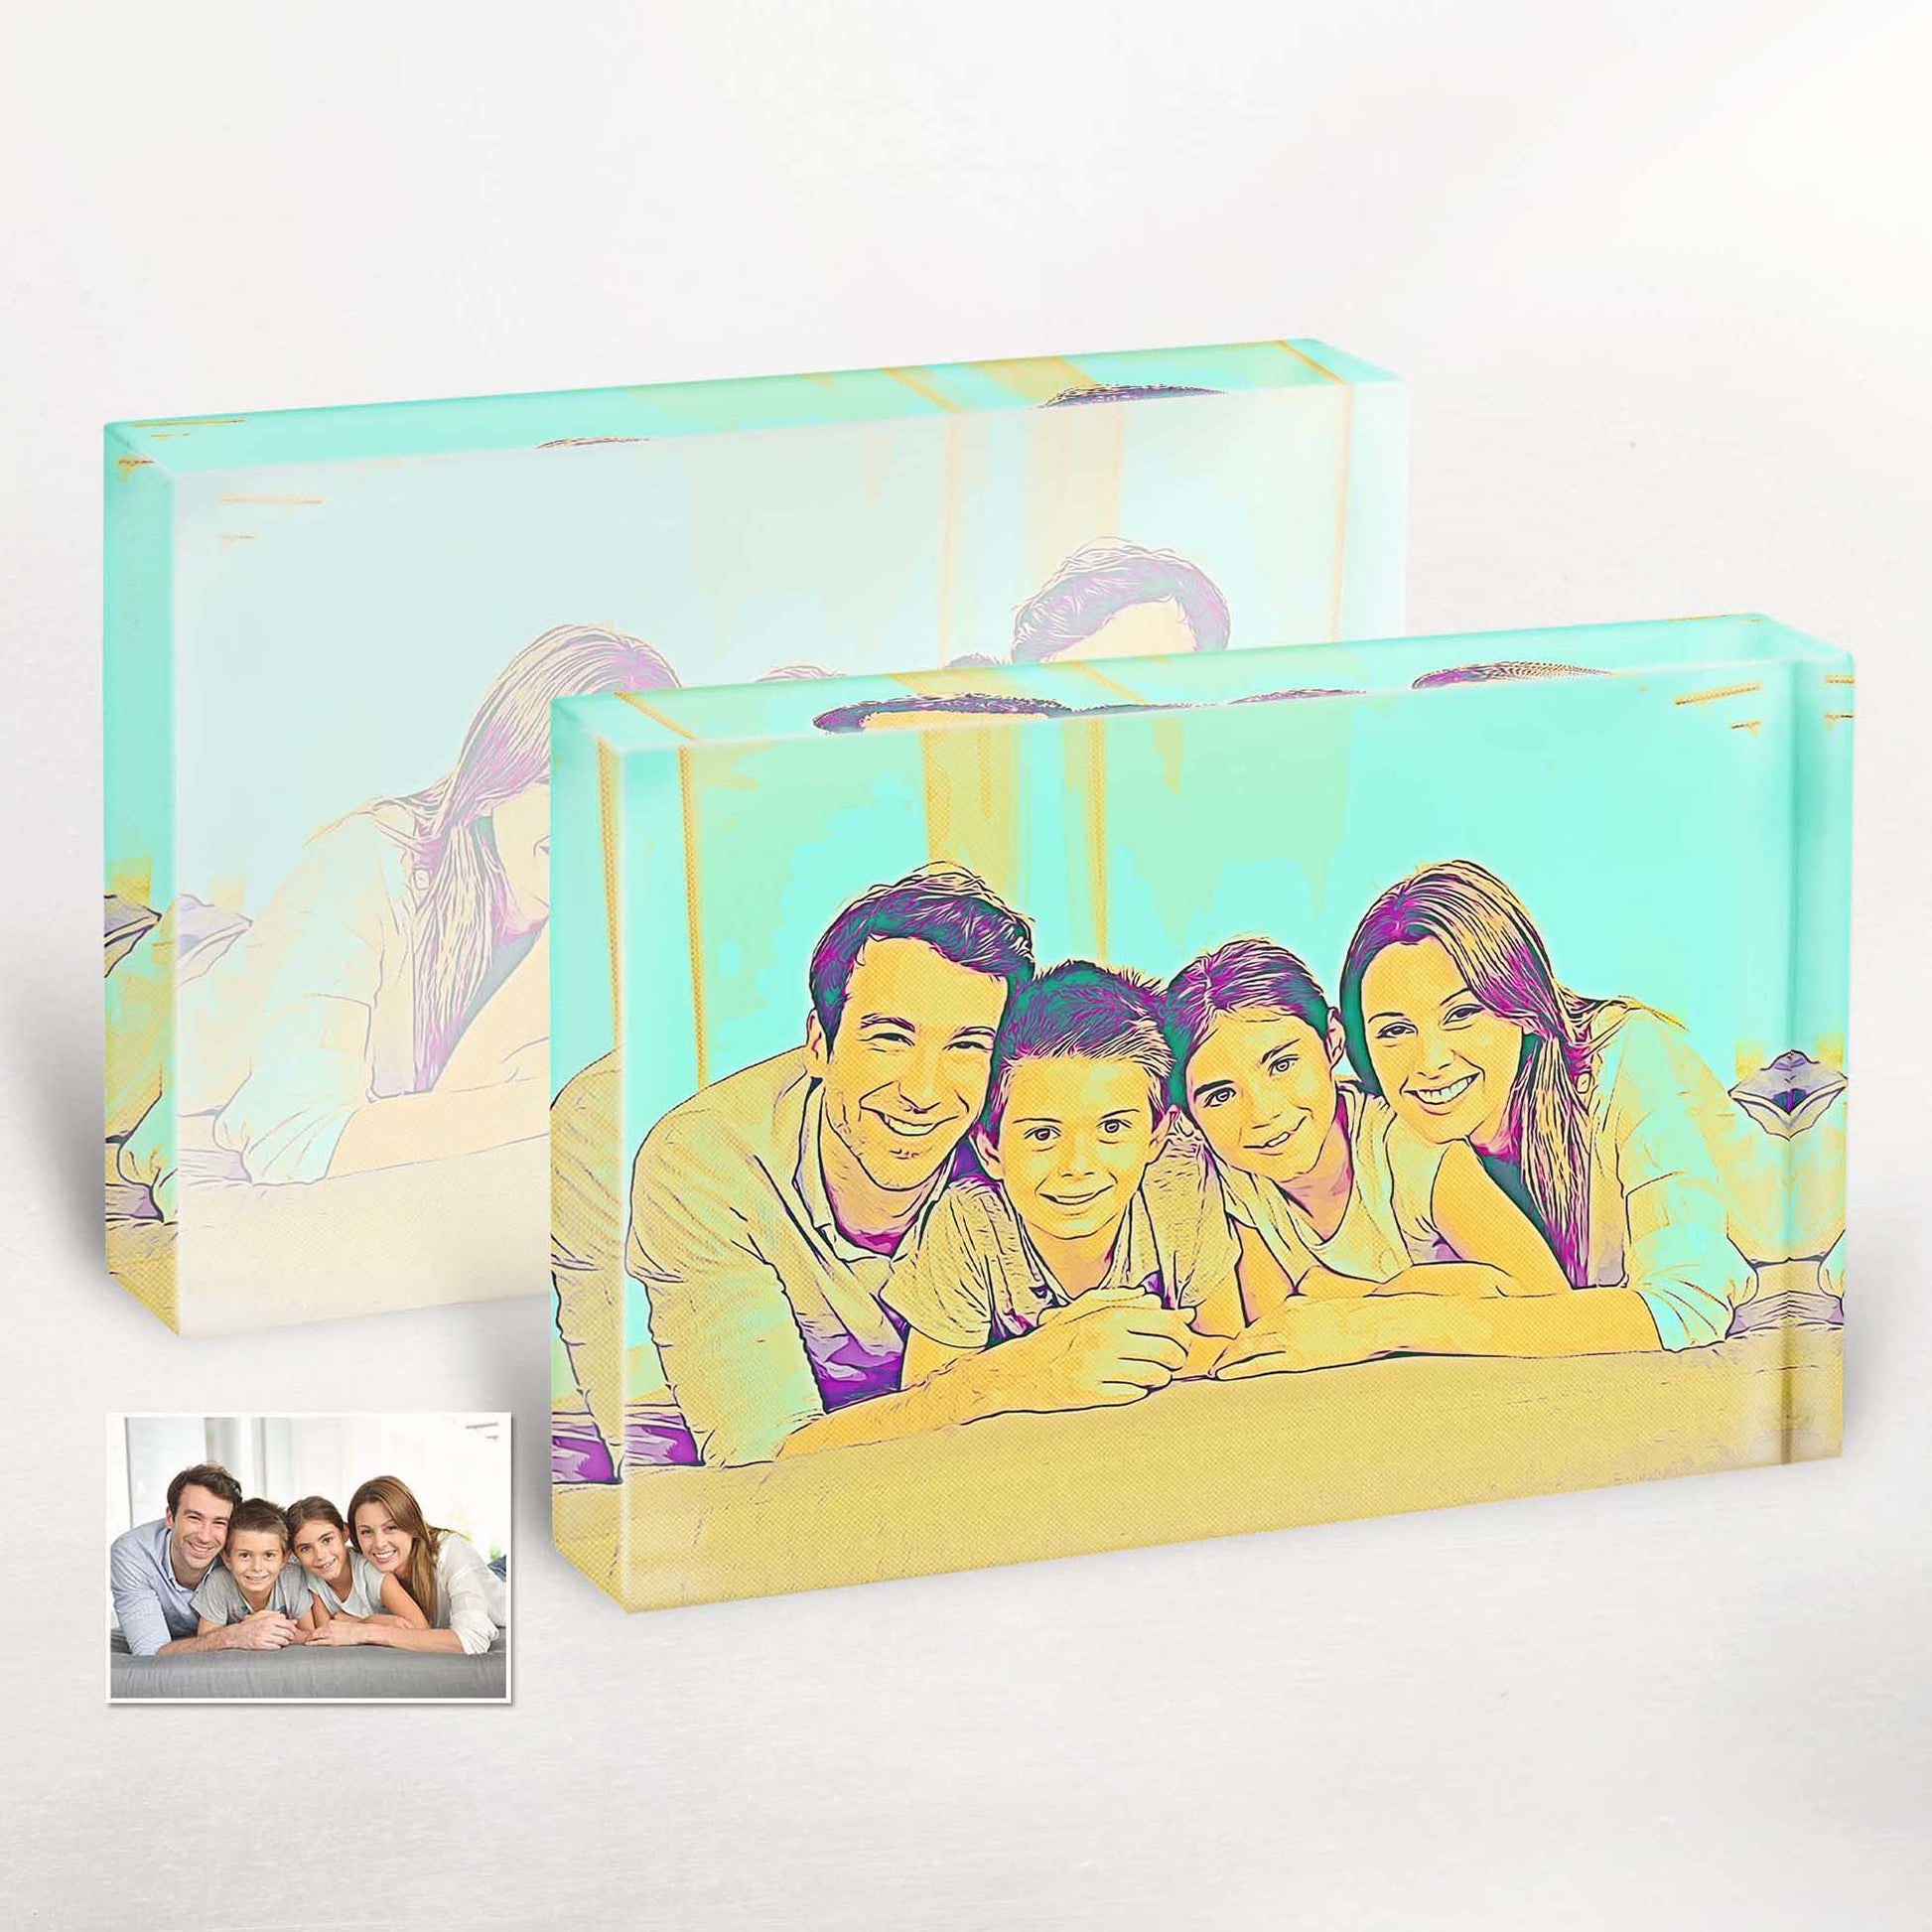 Make your anniversary extra special with our Personalised Blue and Yellow Cartoon Acrylic Block Photo. This fun and vibrant gift idea brings excitement and inspiration, creating a unique and memorable keepsake for family and friends to treasure.